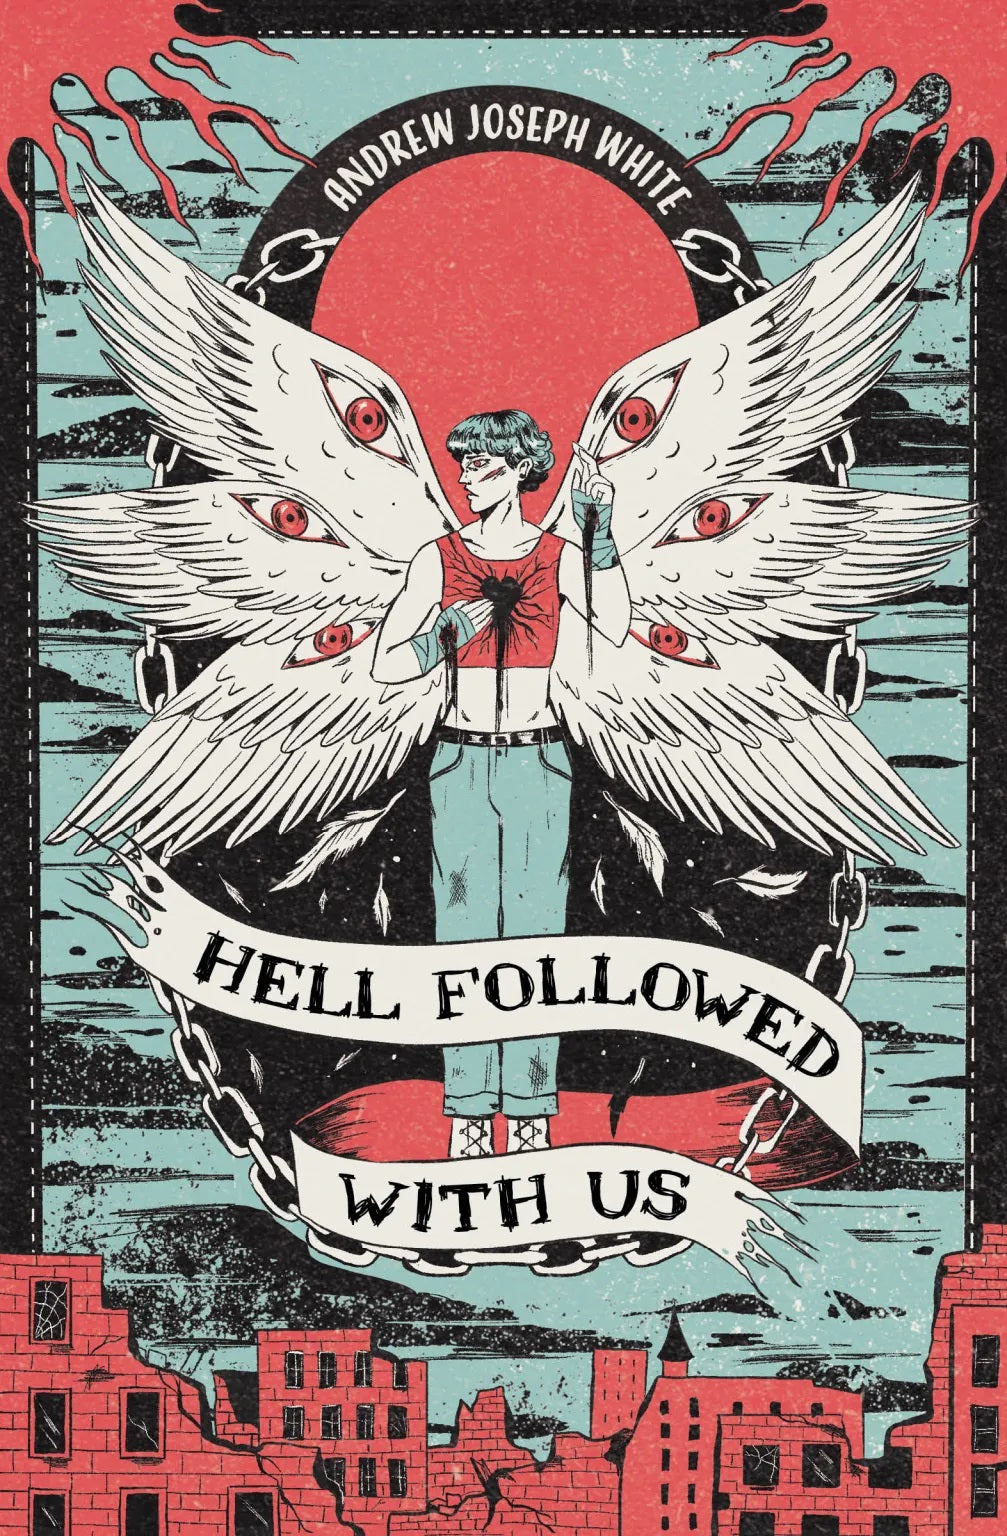 Hell Followed With Us by Andrew Joseph White (used.)